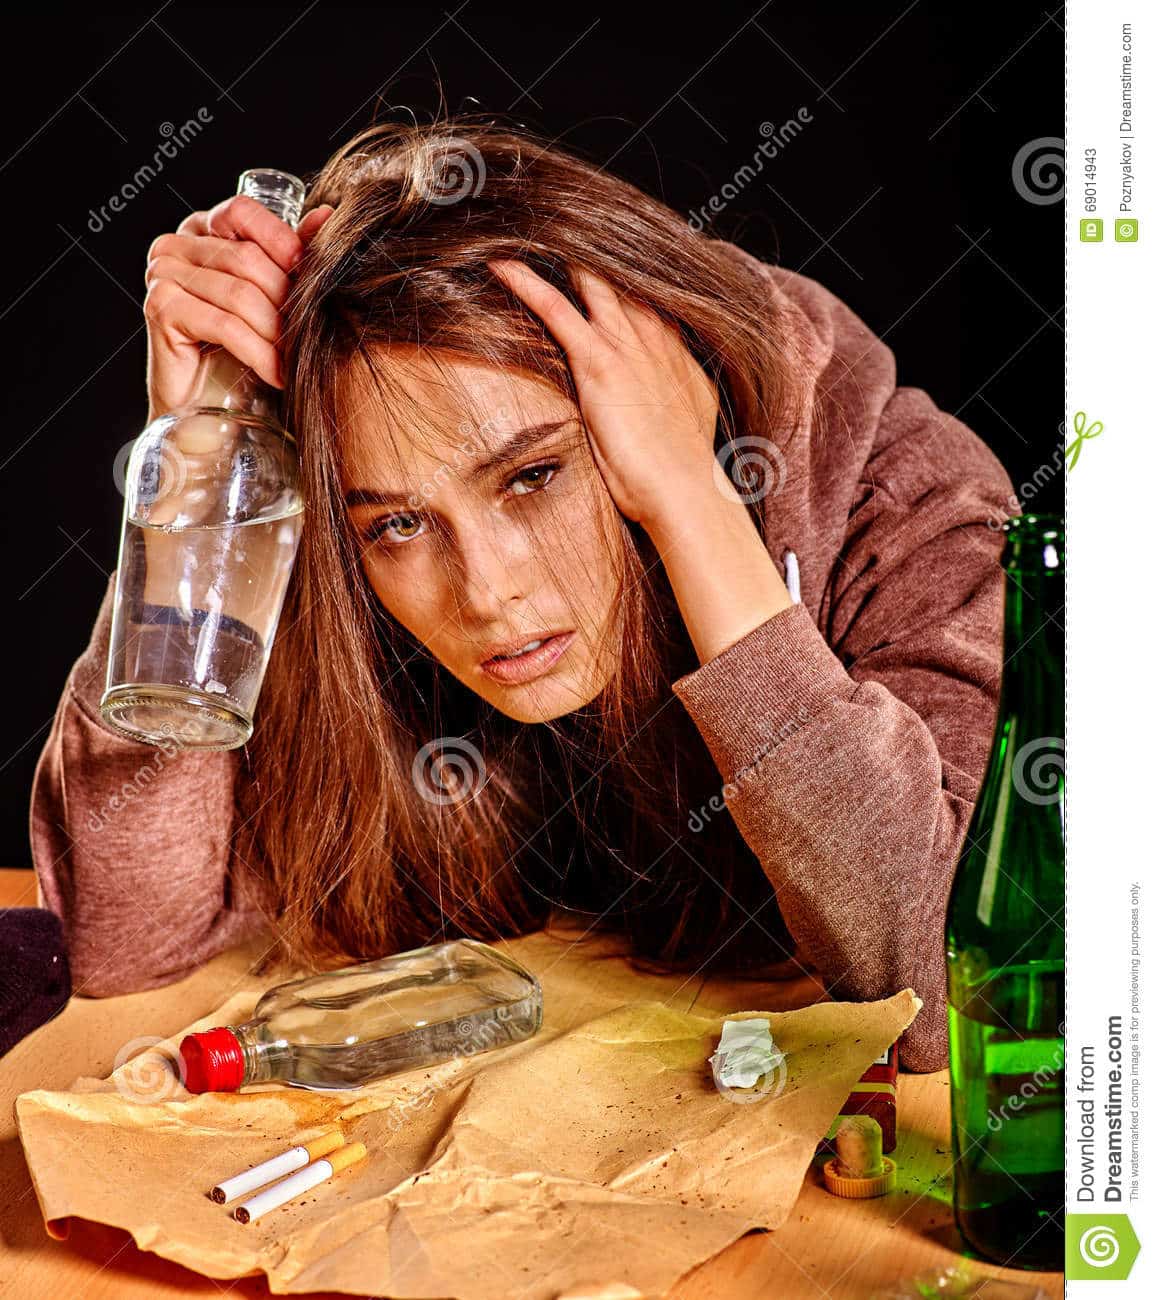 Girl in Depression Drinking Alcohol. Stock Image